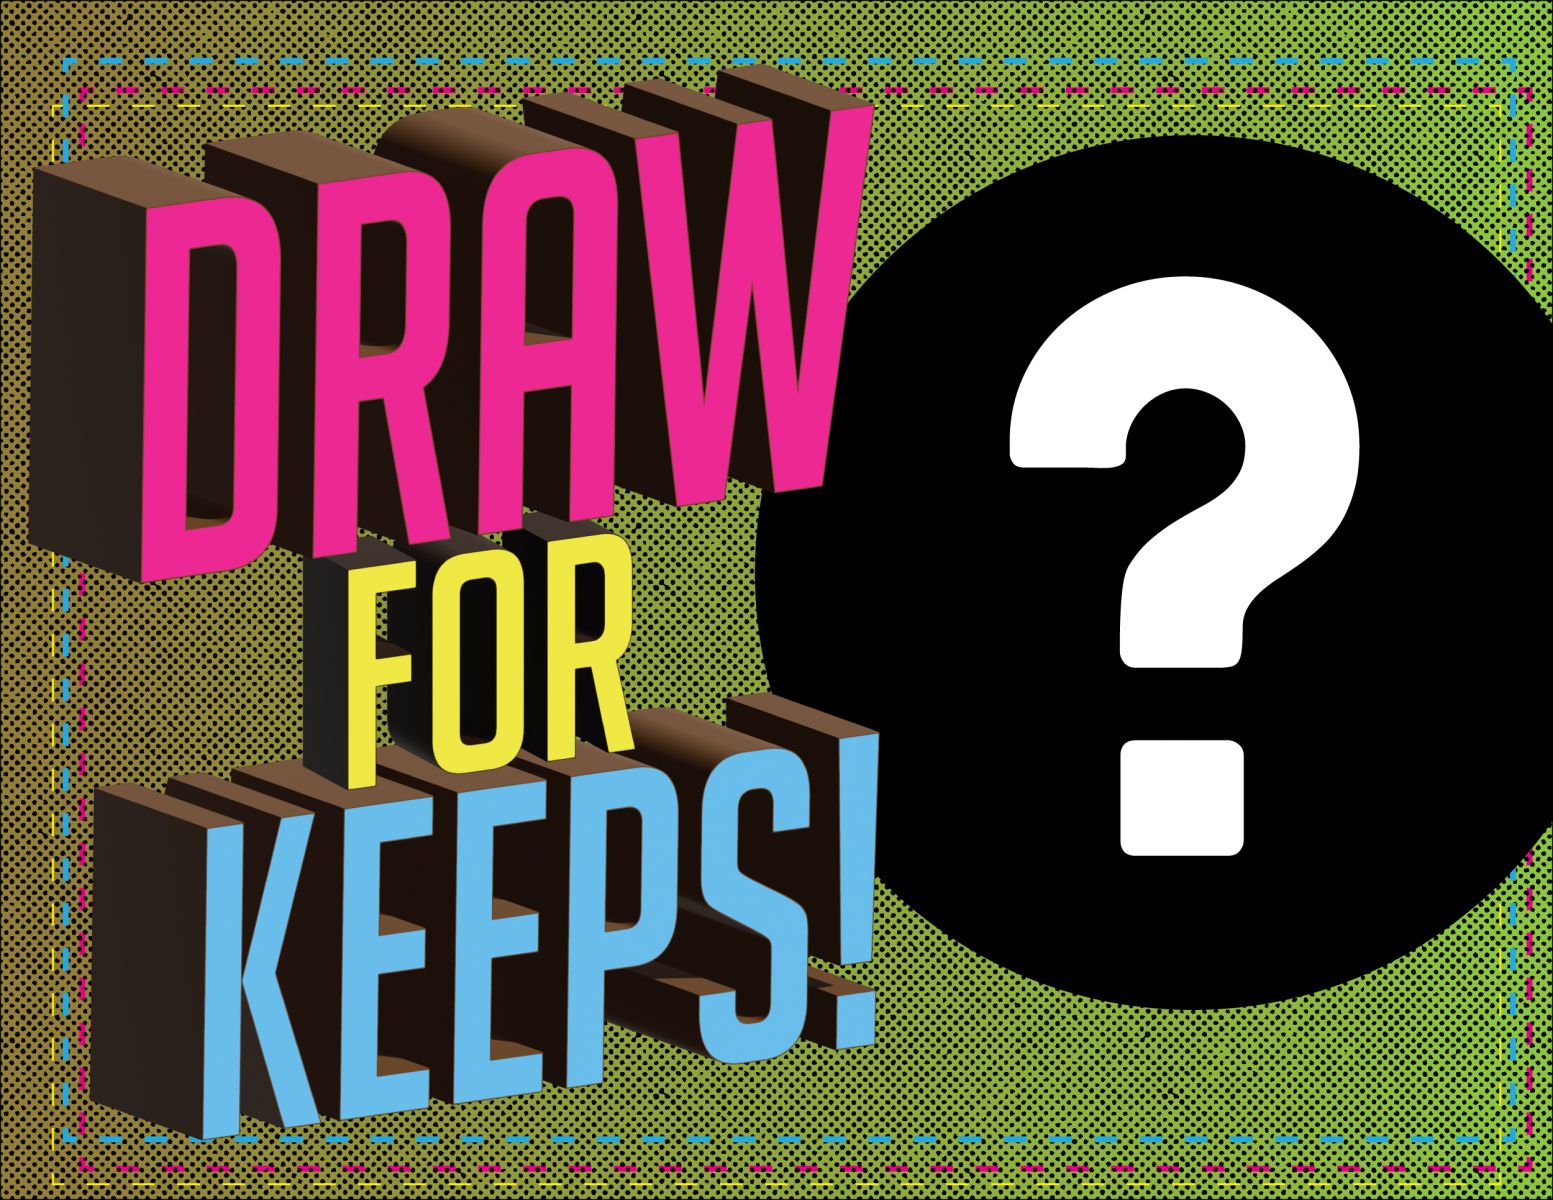 Art Day 40 Draw for Keeps 